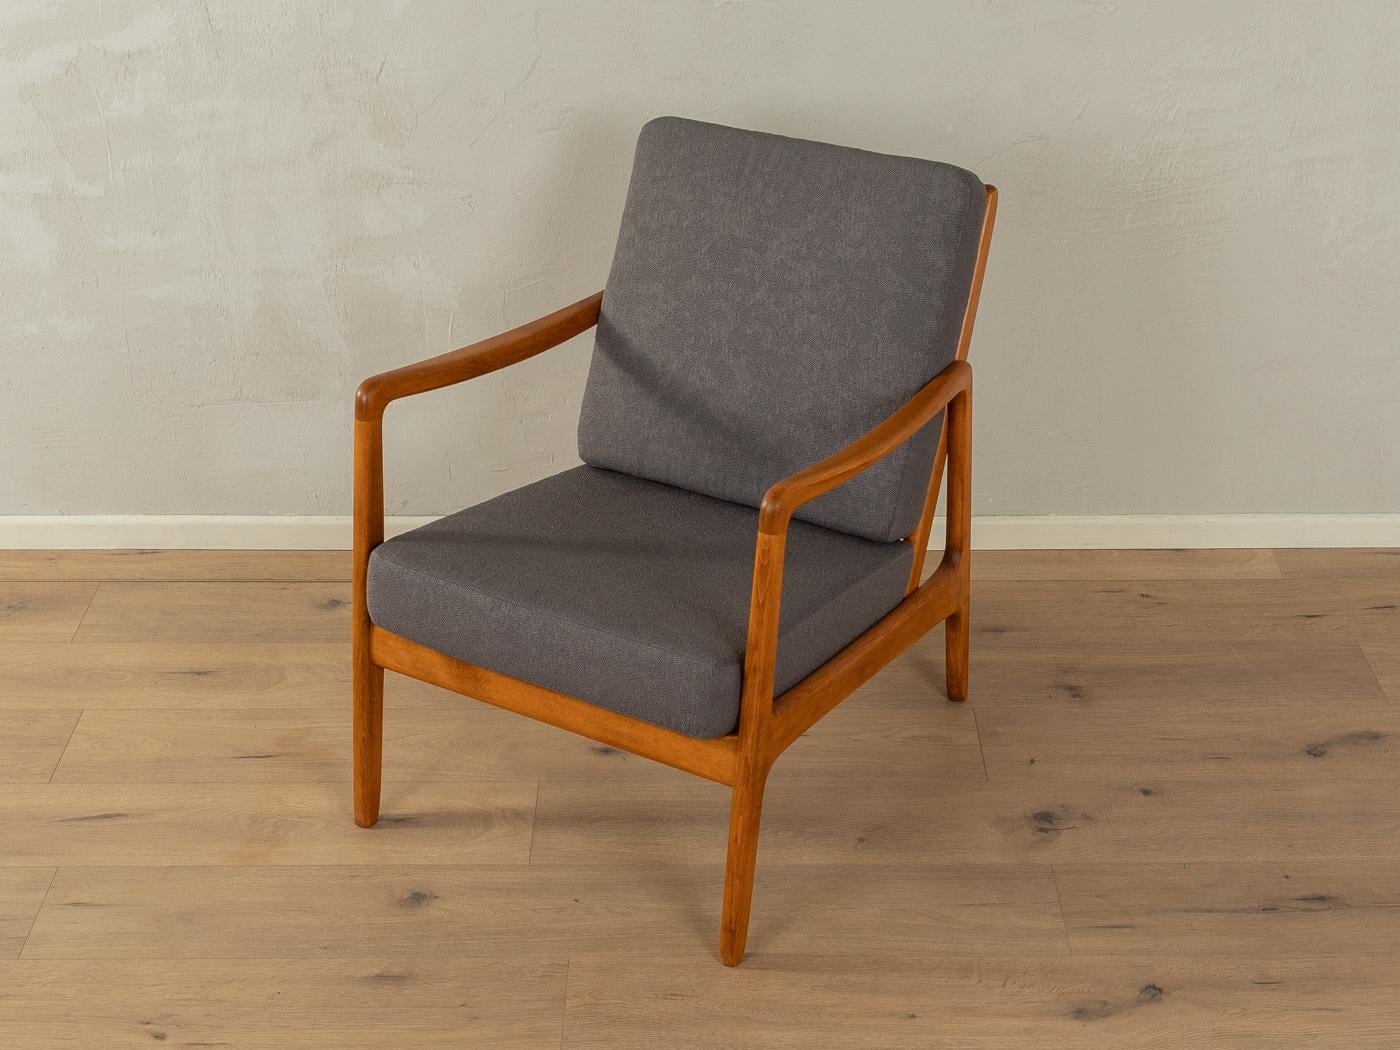 Elegant armchair from the 1950s by Ole Wanscher for France & Daverkosen. Rare model FD-109 features a solid beech frame stained in teak with a sloping open back and angled legs for an organic aesthetic. The original spring basket has been